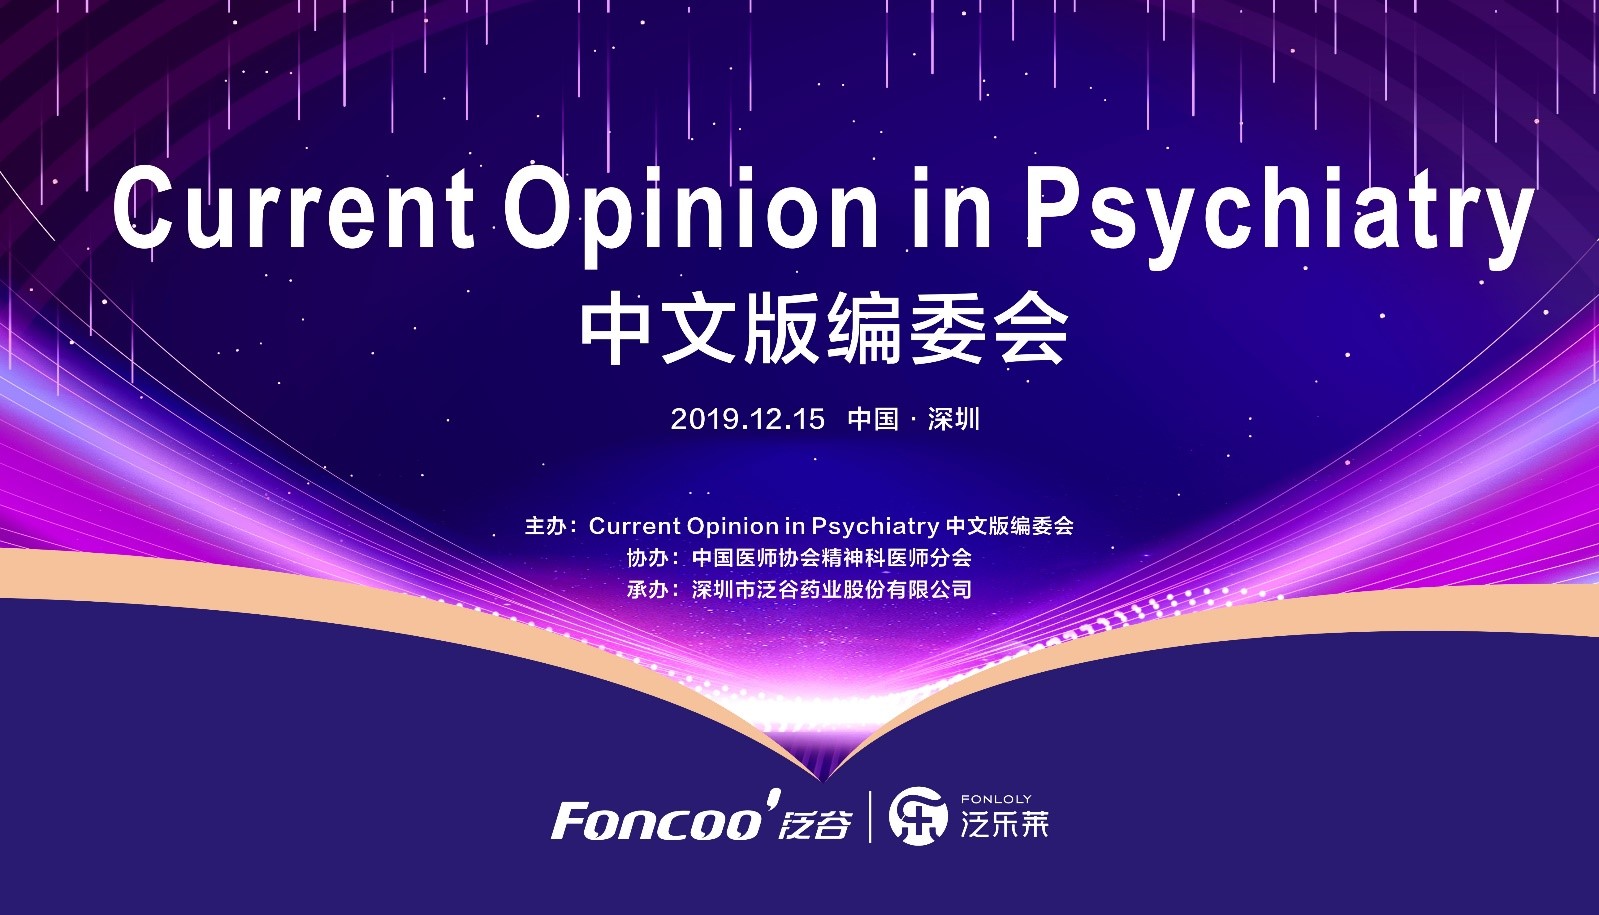 2019 Editorial Board of the Chinese Edition of Current Opinion in Psychiatry Held in Shenzhen